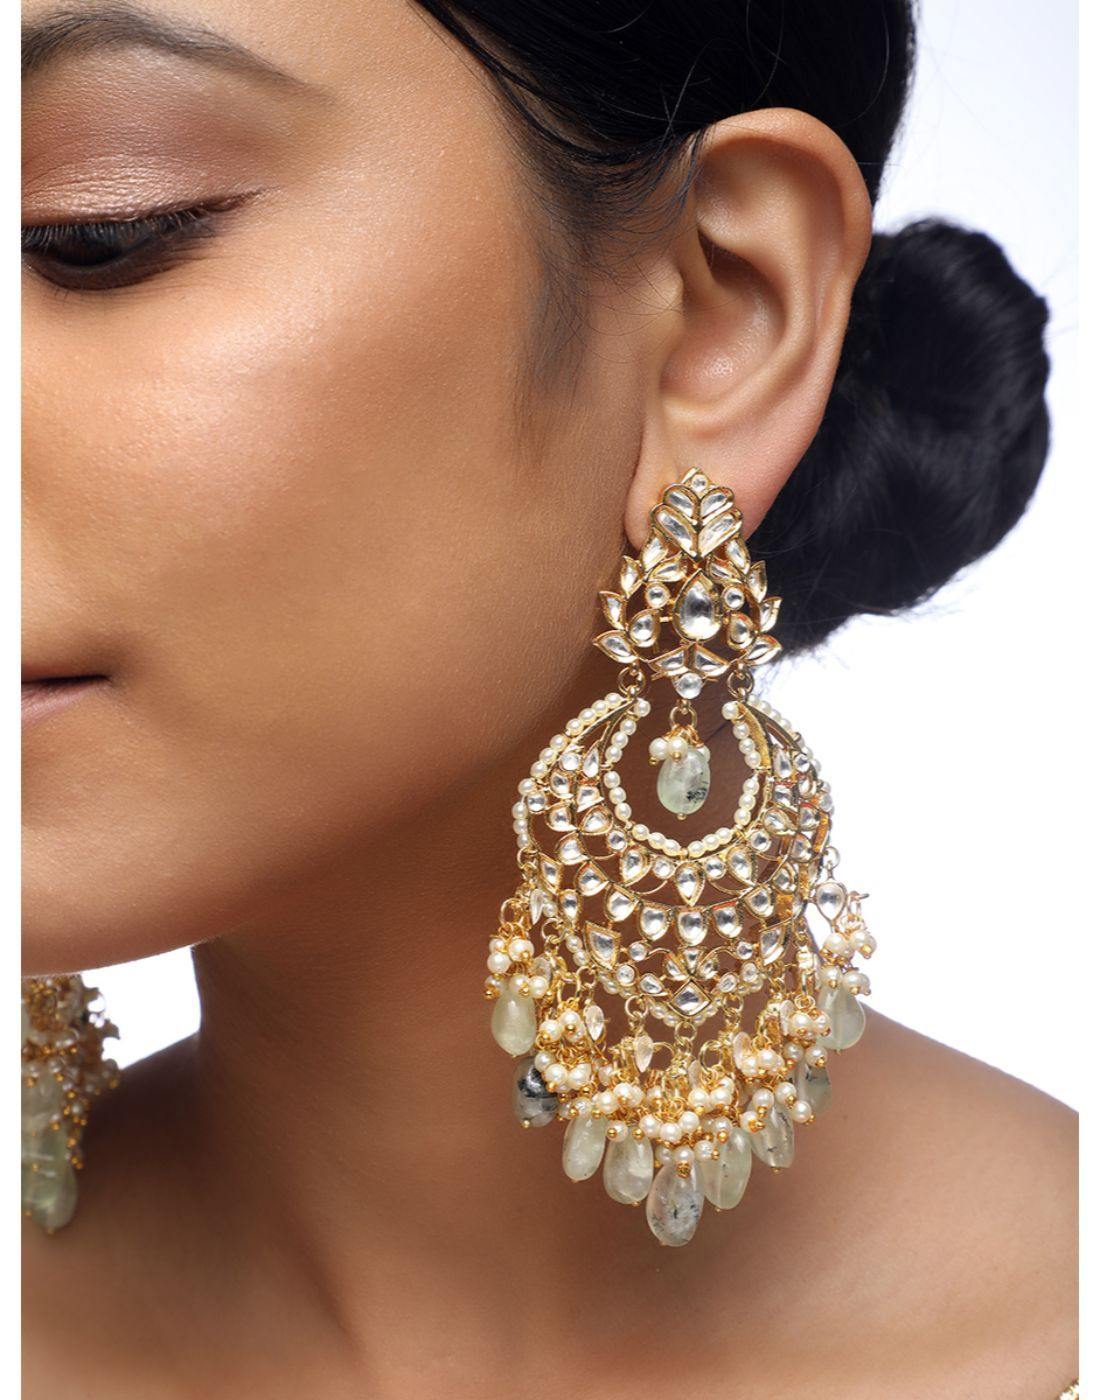 Statement earrings: The coolest new styles and how to wear them | Vogue  India